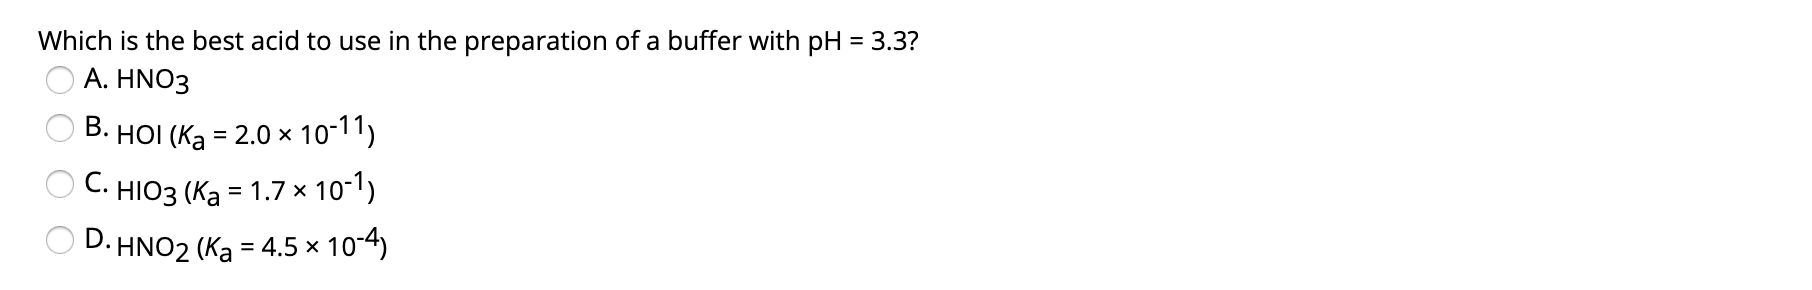 Which is the best acid to use in the preparation of a buffer with pH =3.3?
A. HNO3
B. HOI (Ka = 2.0 x 10-11)
C.
HIO3 (Ka = 1.7 × 10-1)
D. HNO2 (Ka = 4.5 × 10-4)
